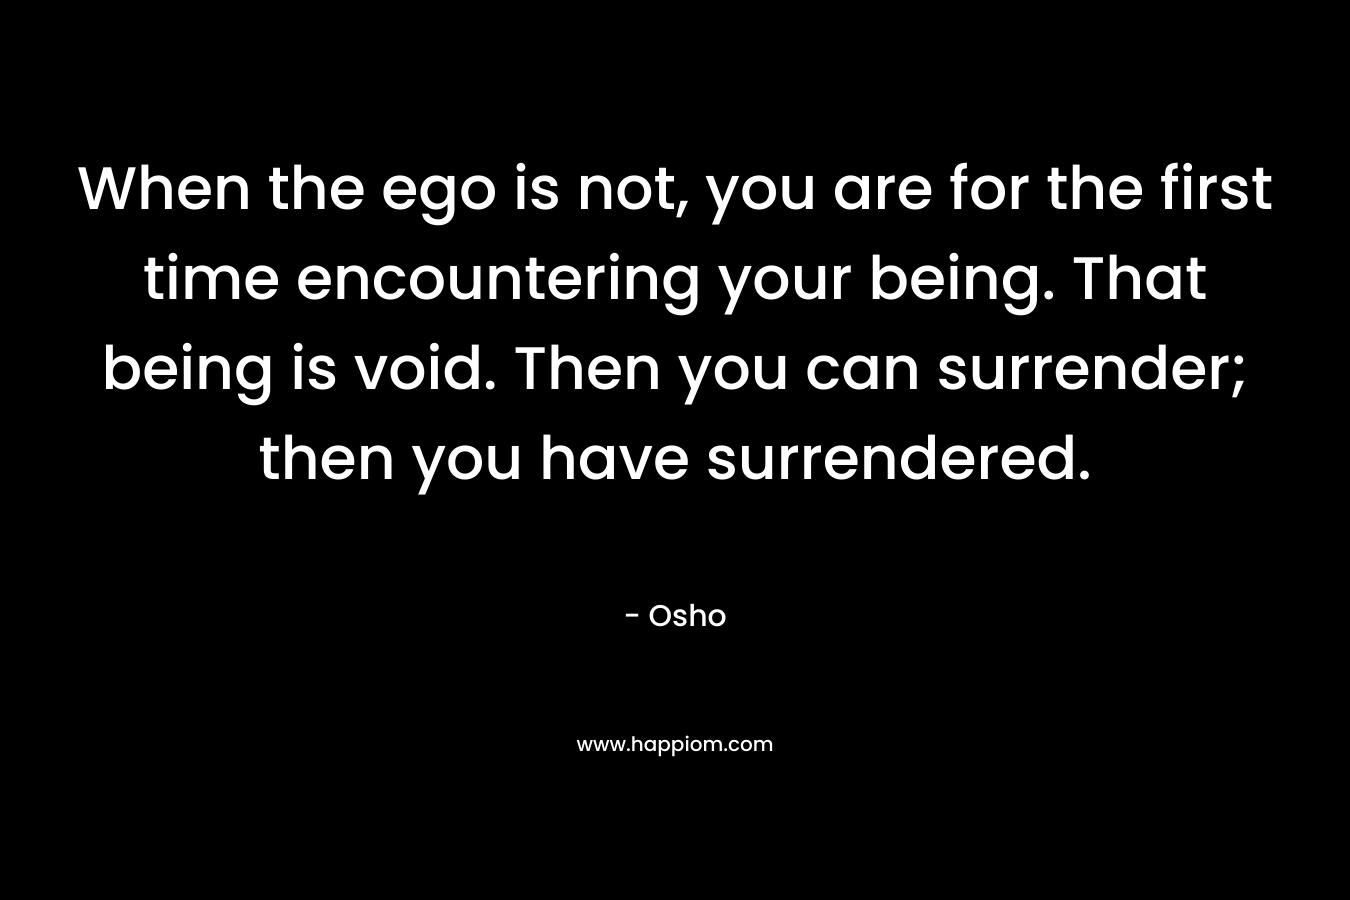 When the ego is not, you are for the first time encountering your being. That being is void. Then you can surrender; then you have surrendered.